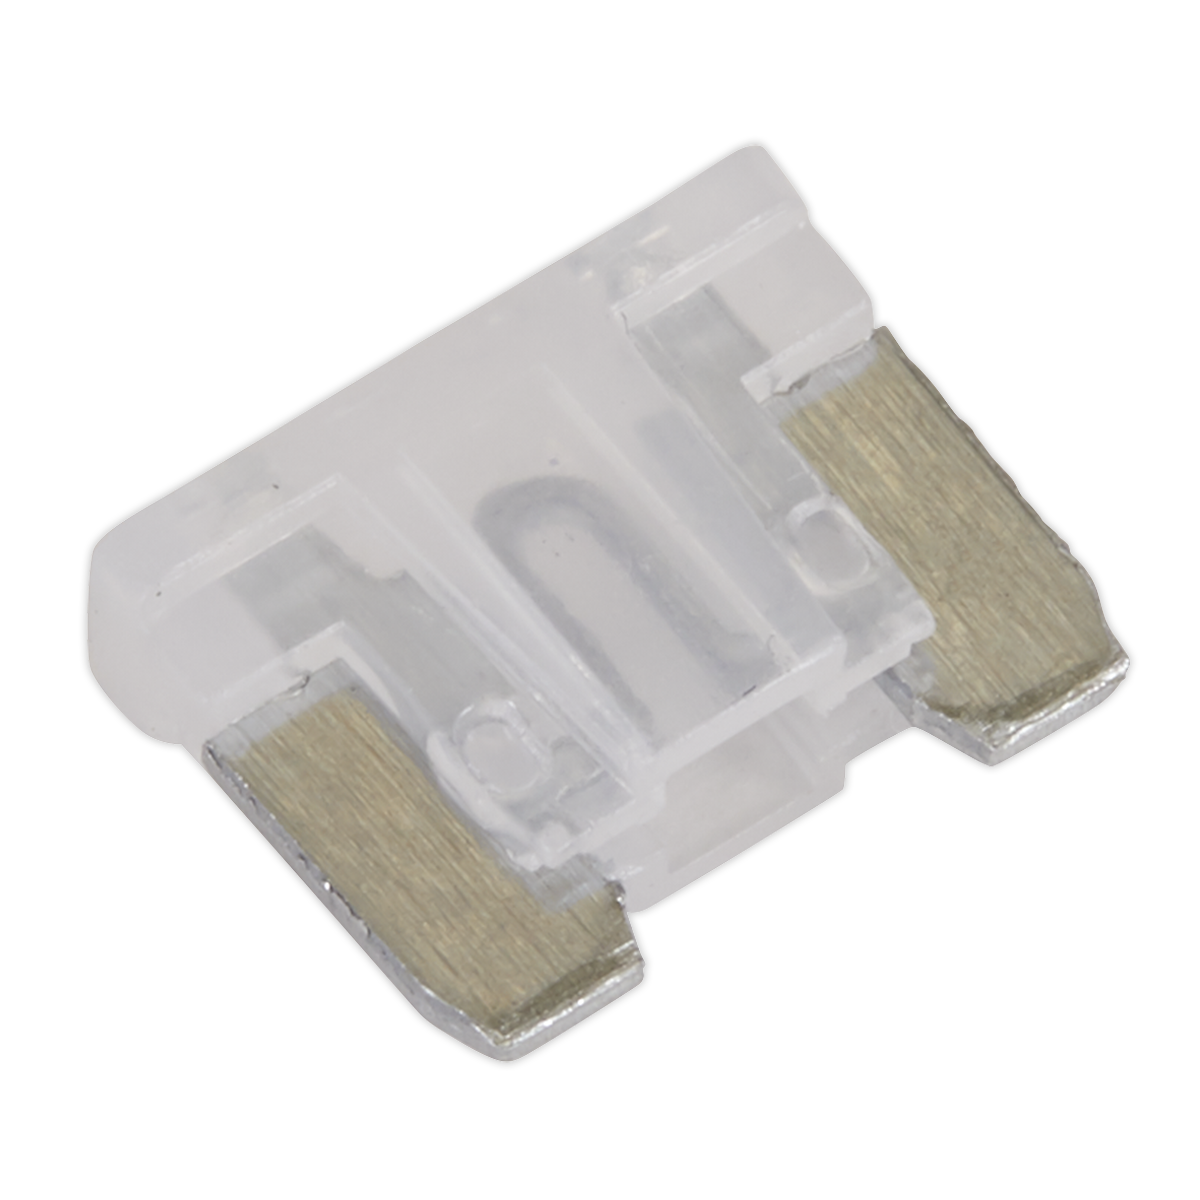 Sealey Automotive MICRO Blade Fuse 25A - Pack of 50 MIBF25